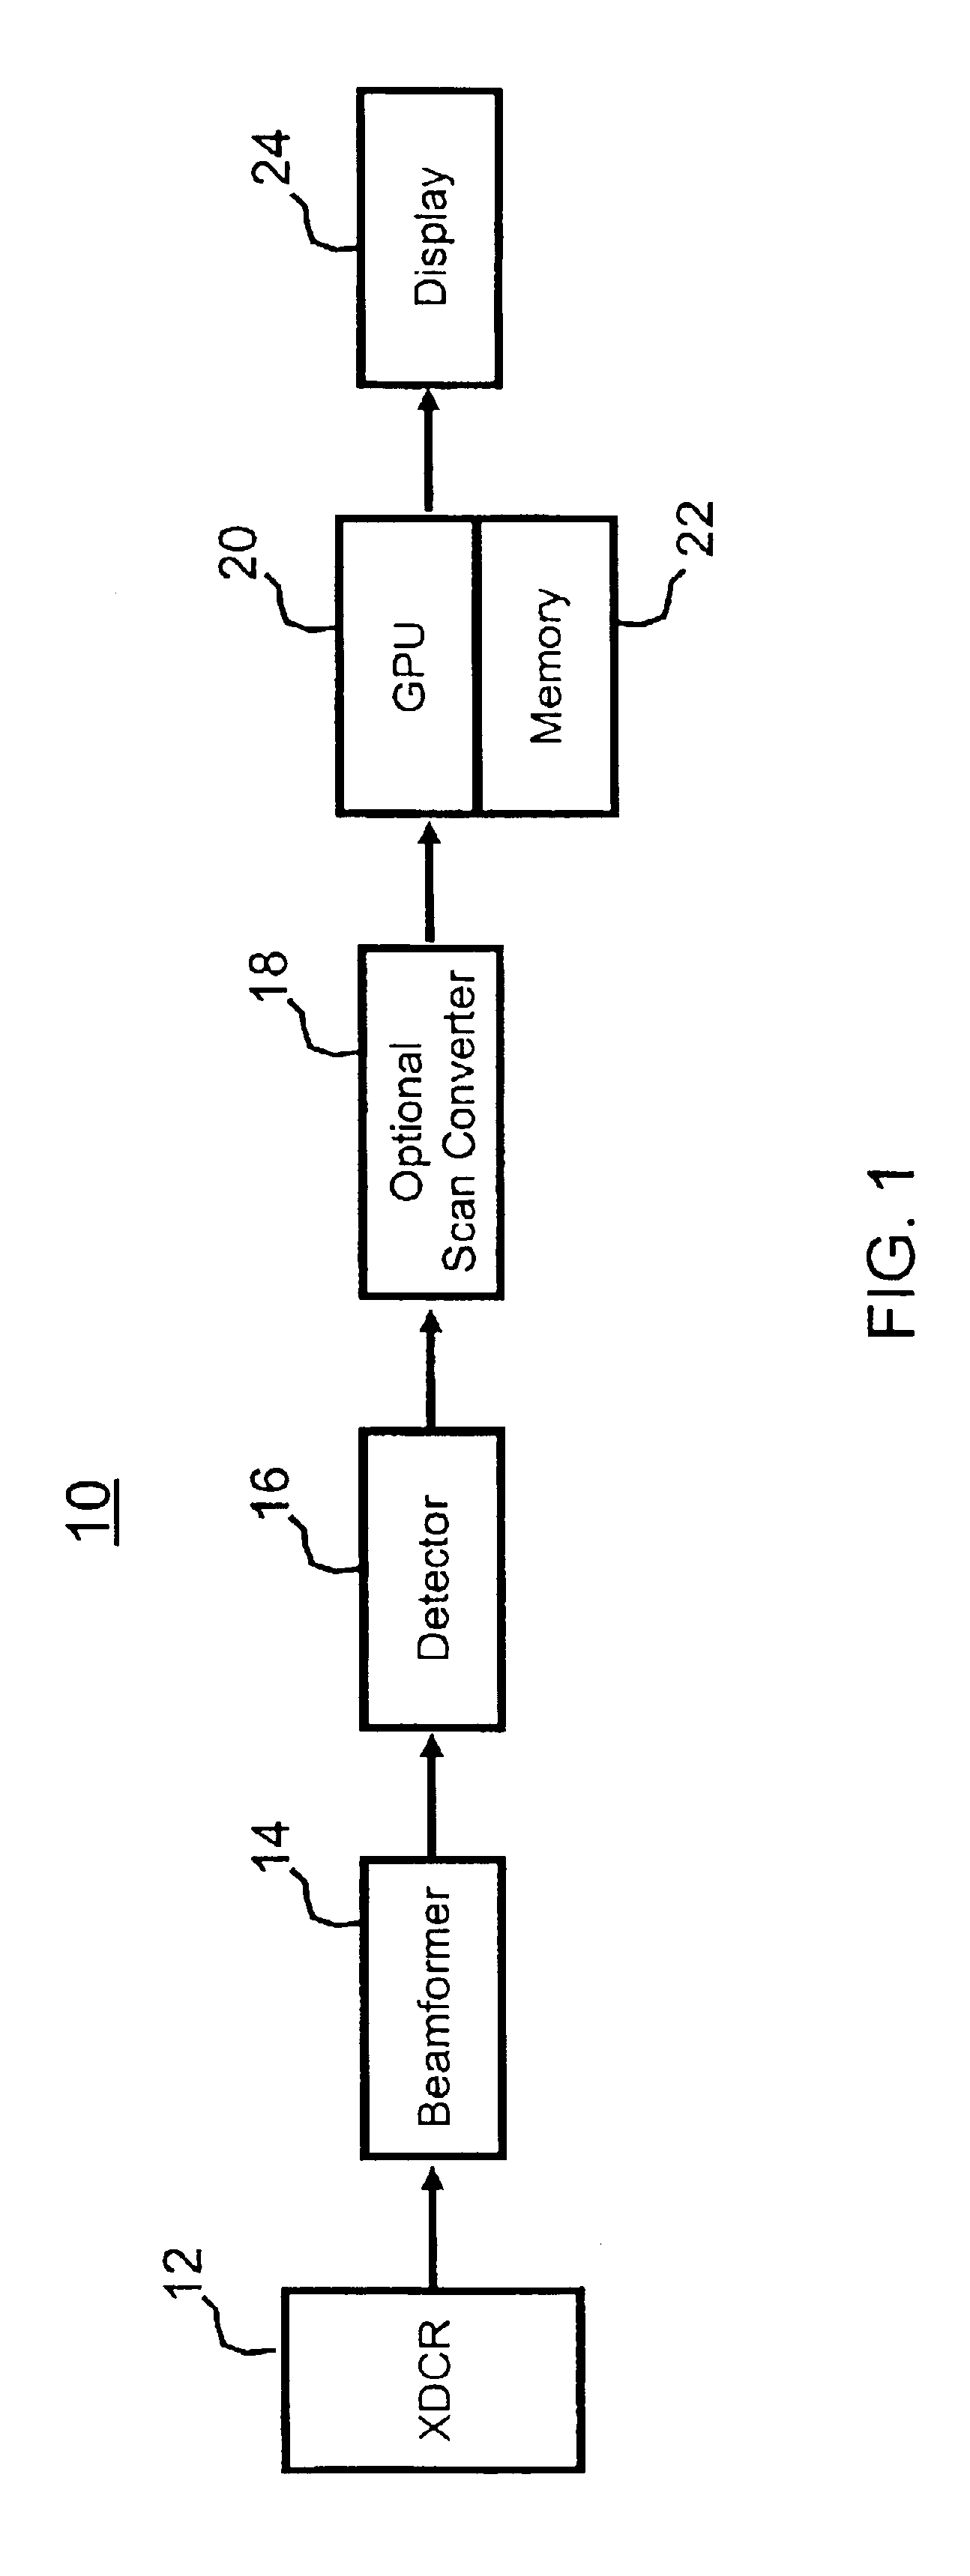 Volume rendering in the acoustic grid methods and systems for ultrasound diagnostic imaging